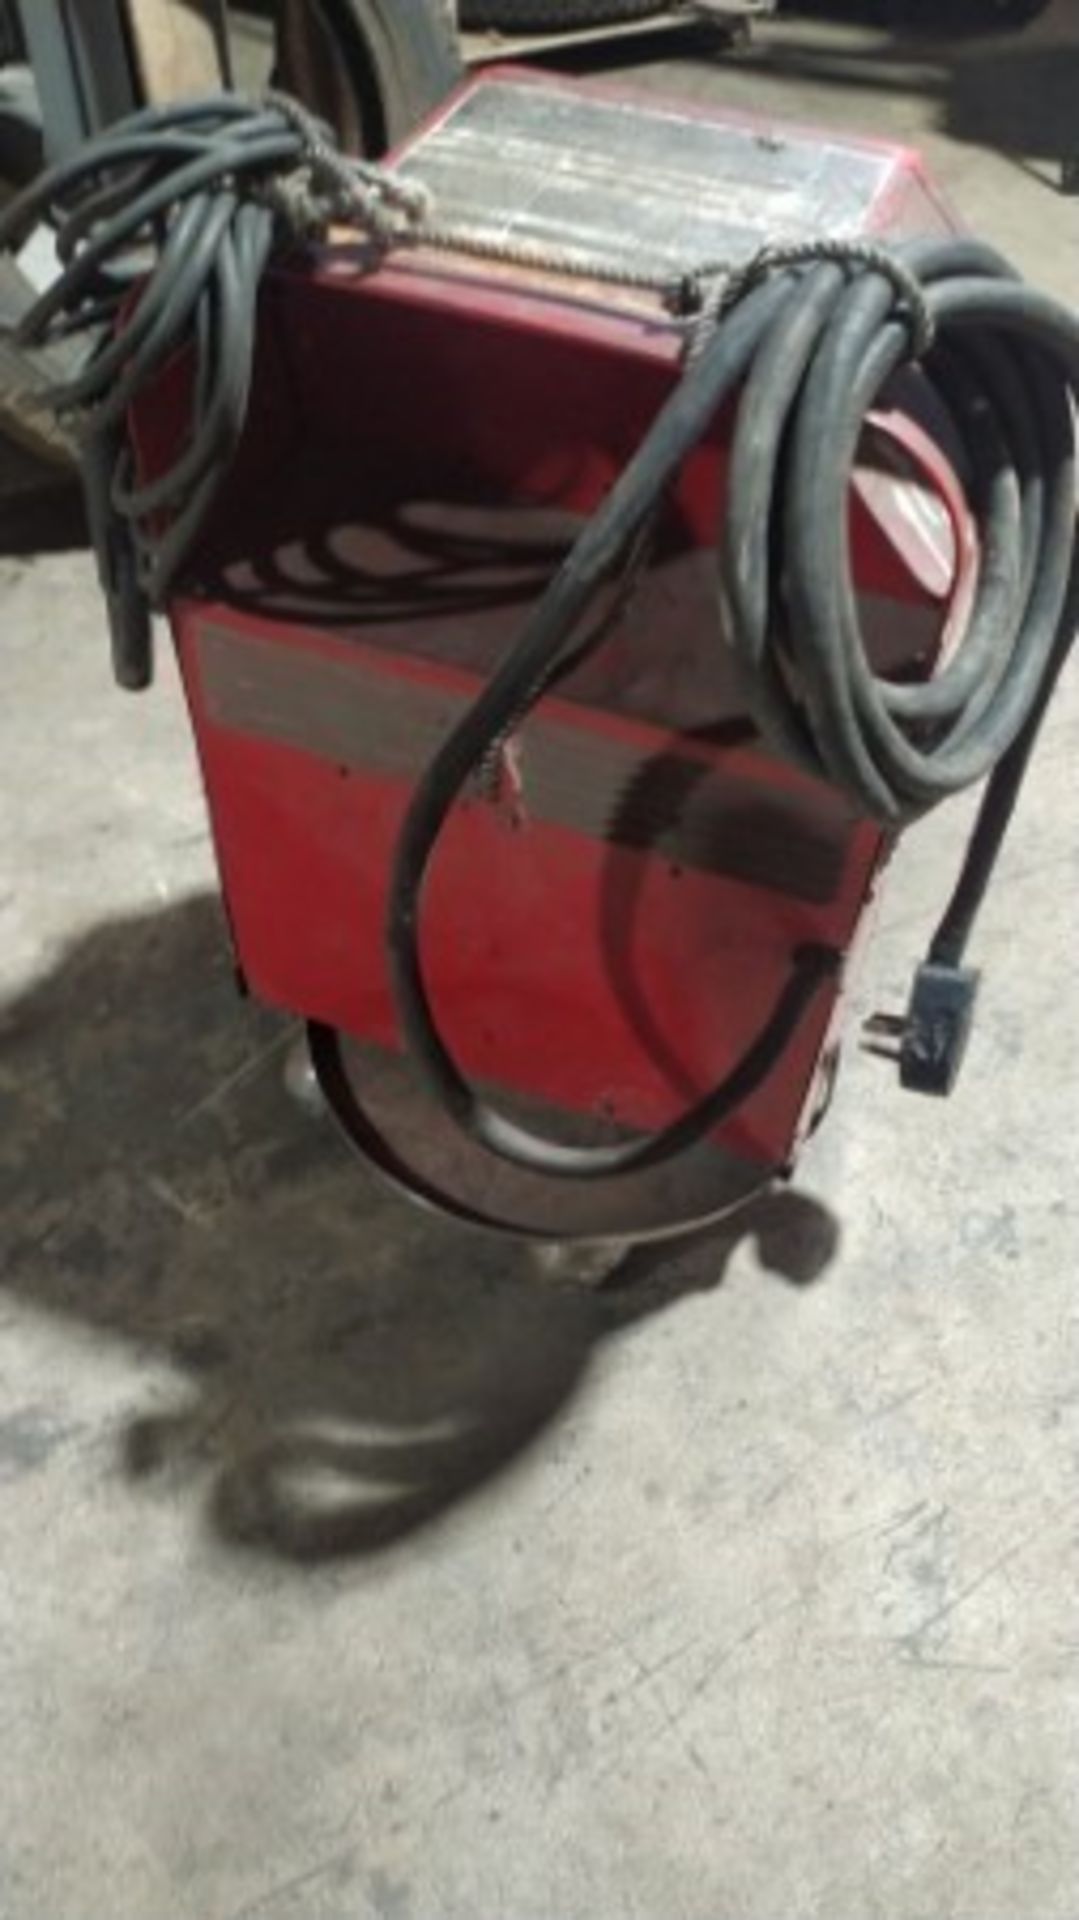 LINCOLN ELECTRIC AC 225 ARC WELDER - Image 3 of 3